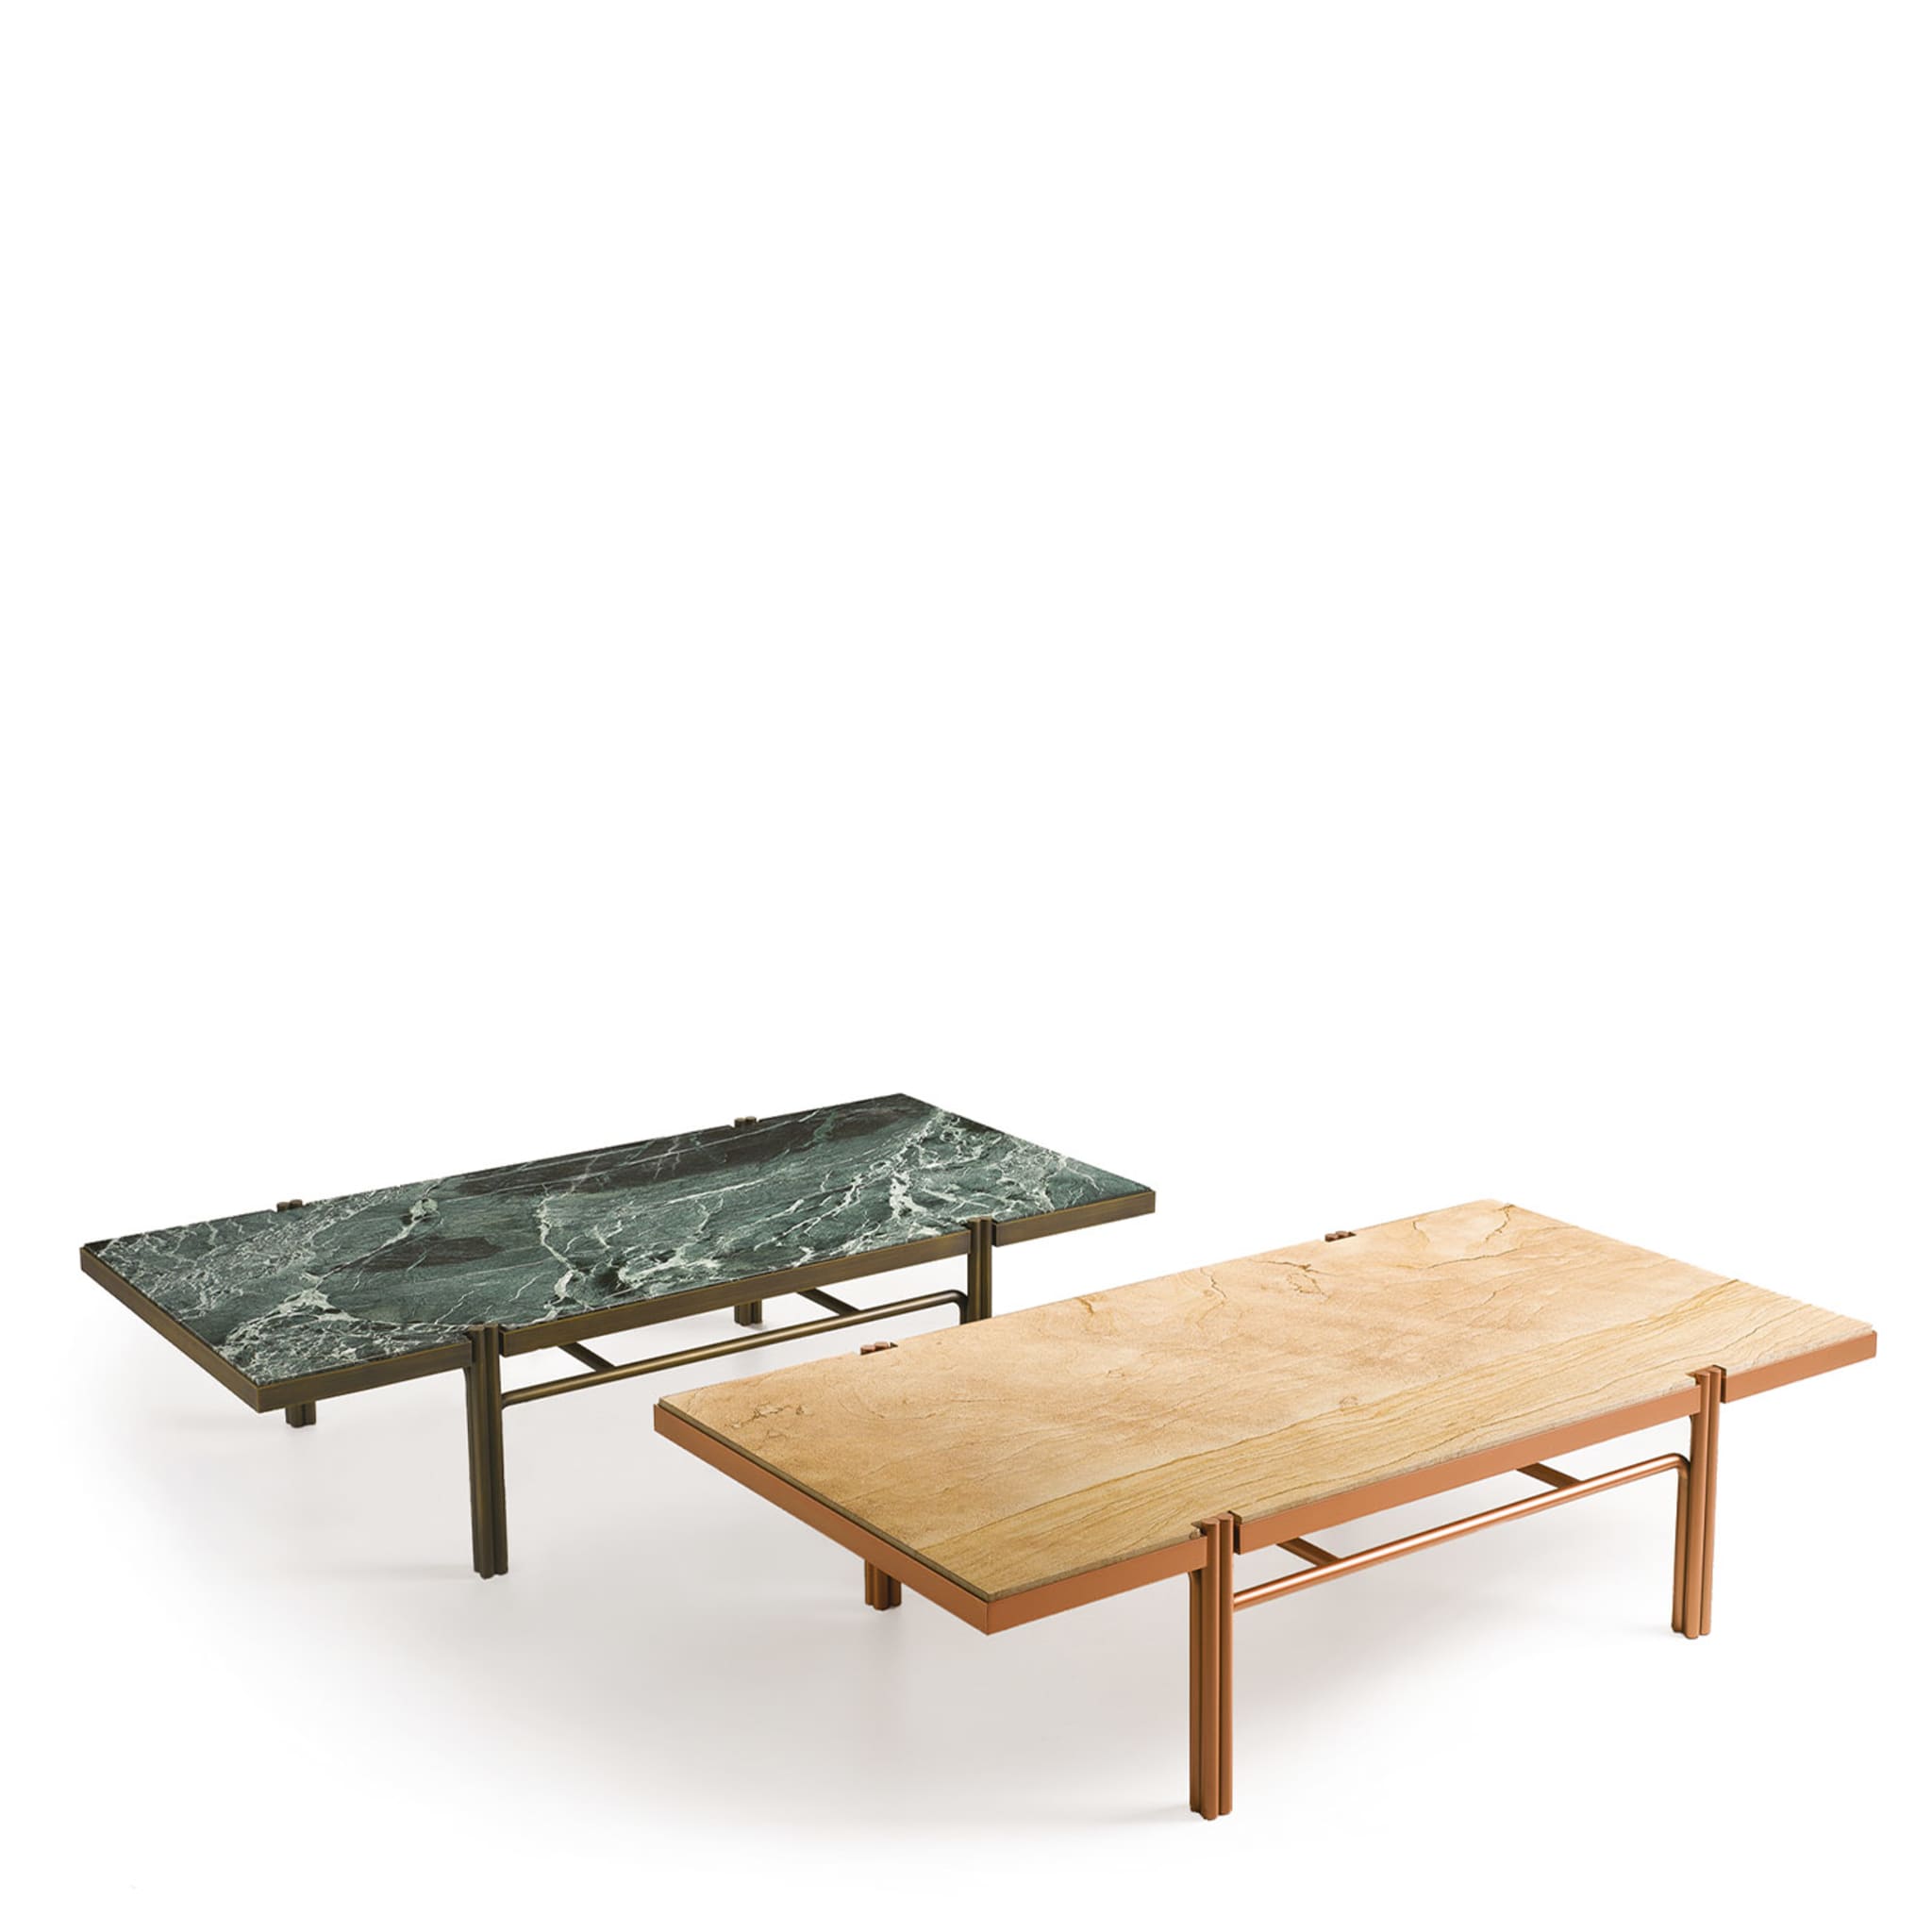 Mathilde Coffee Table in Golden Marble - Alternative view 1